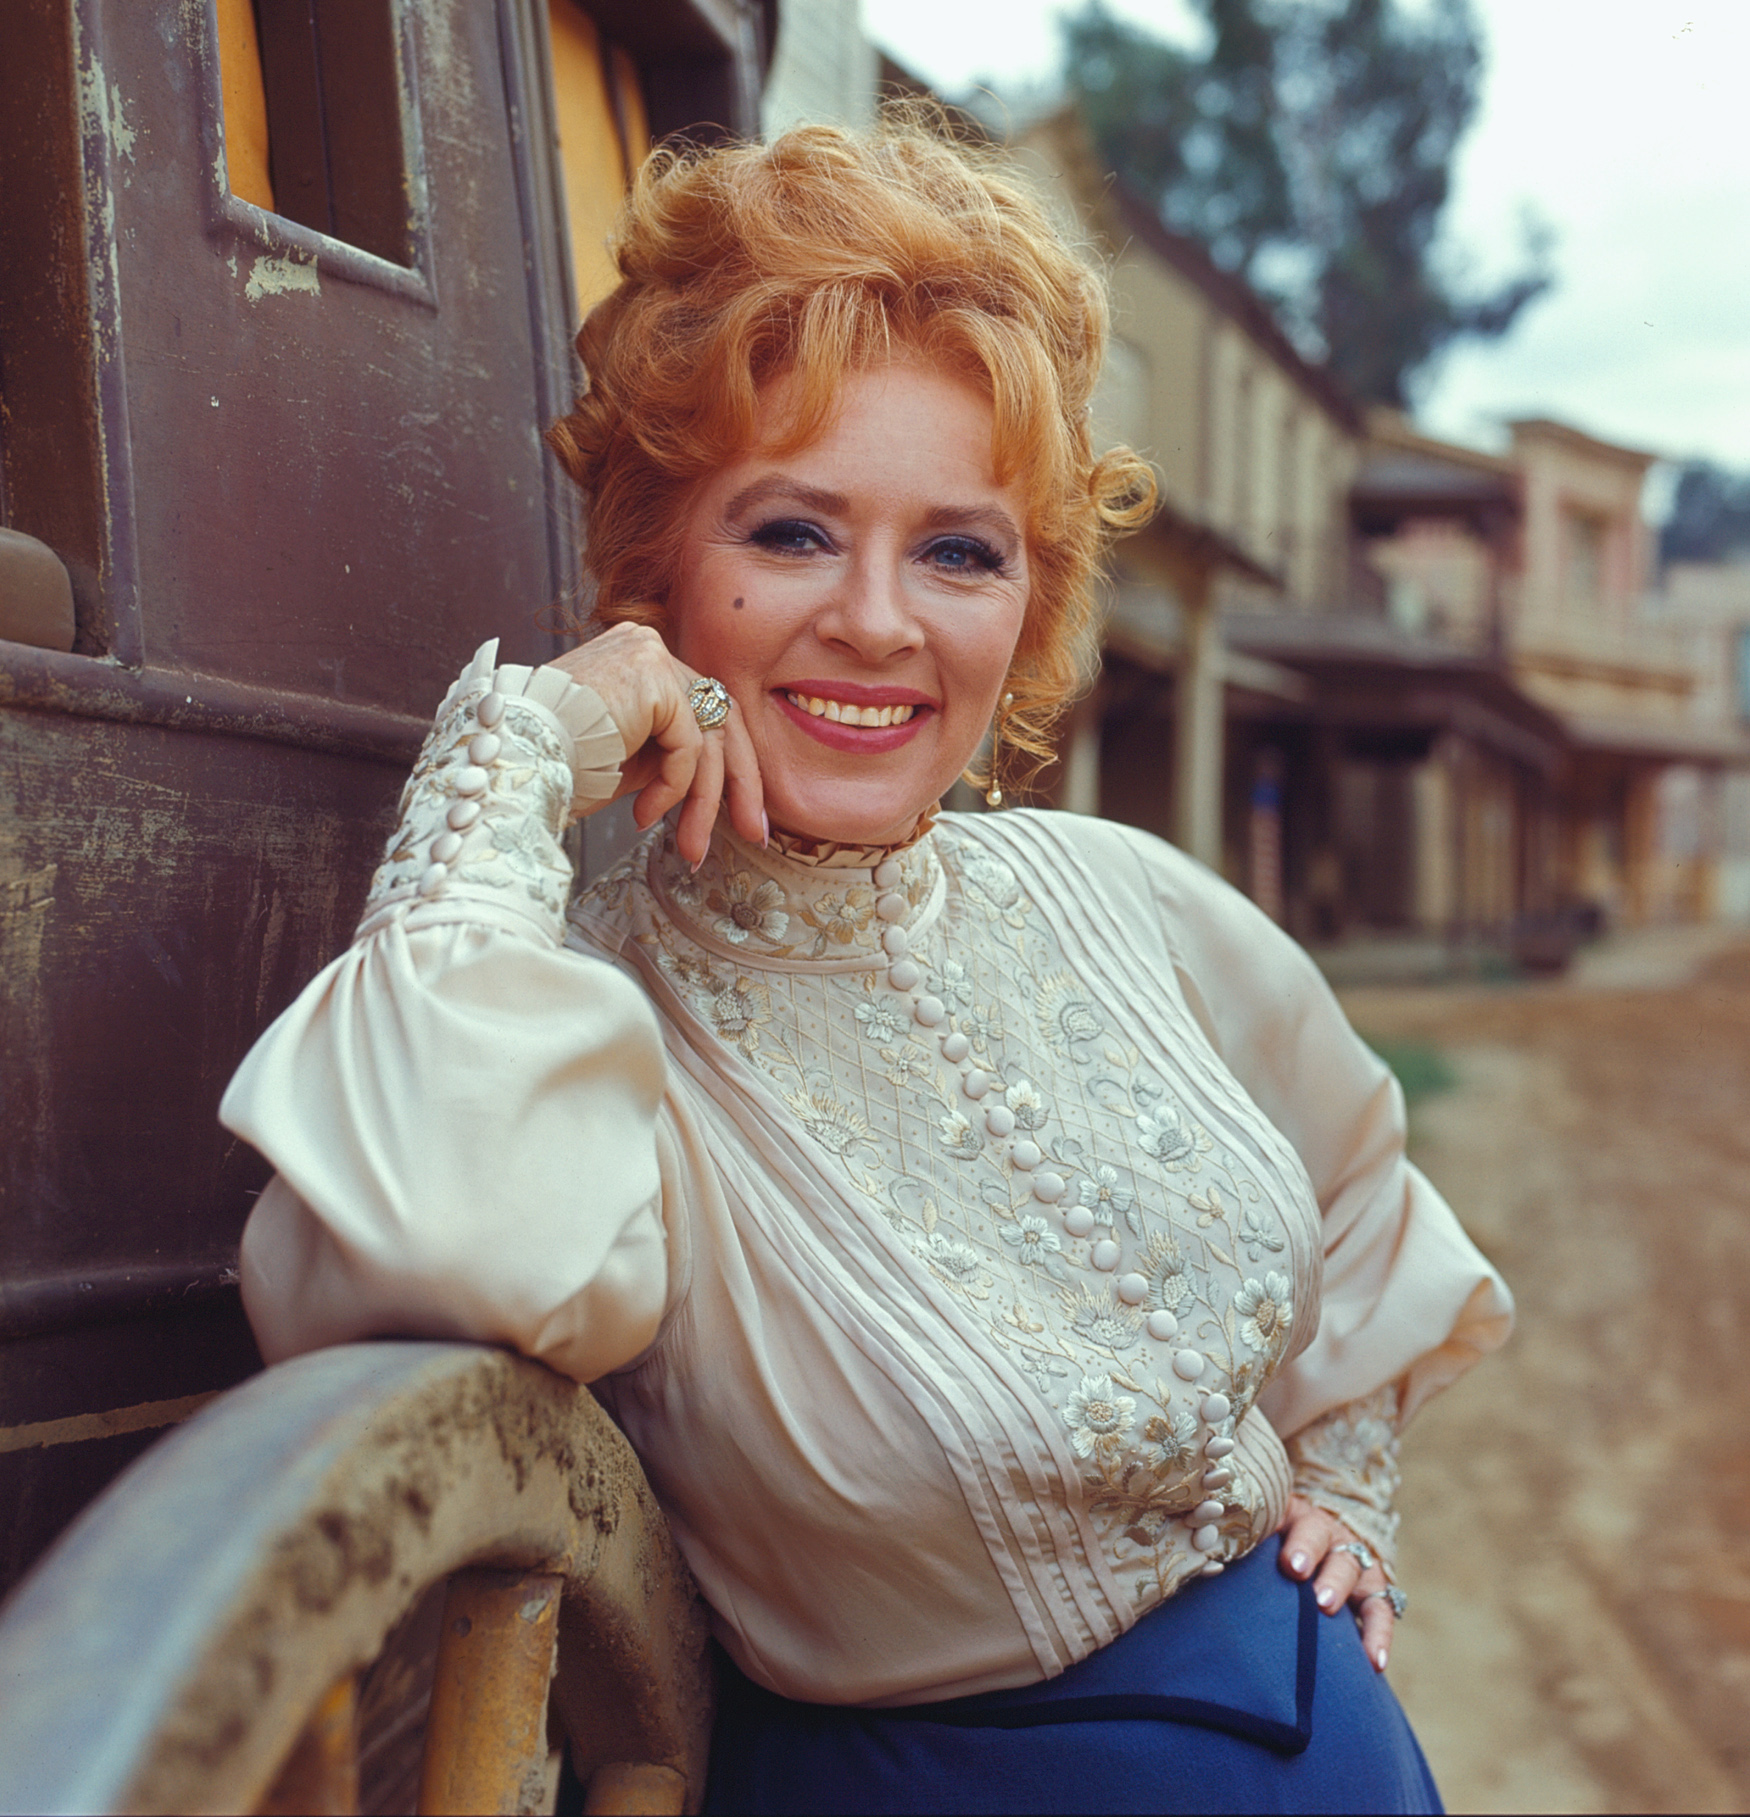 Amanda Blake in costume as Kitty Russell, on the set of the American television series "Gunsmoke" in 1967. | Source: Getty Images